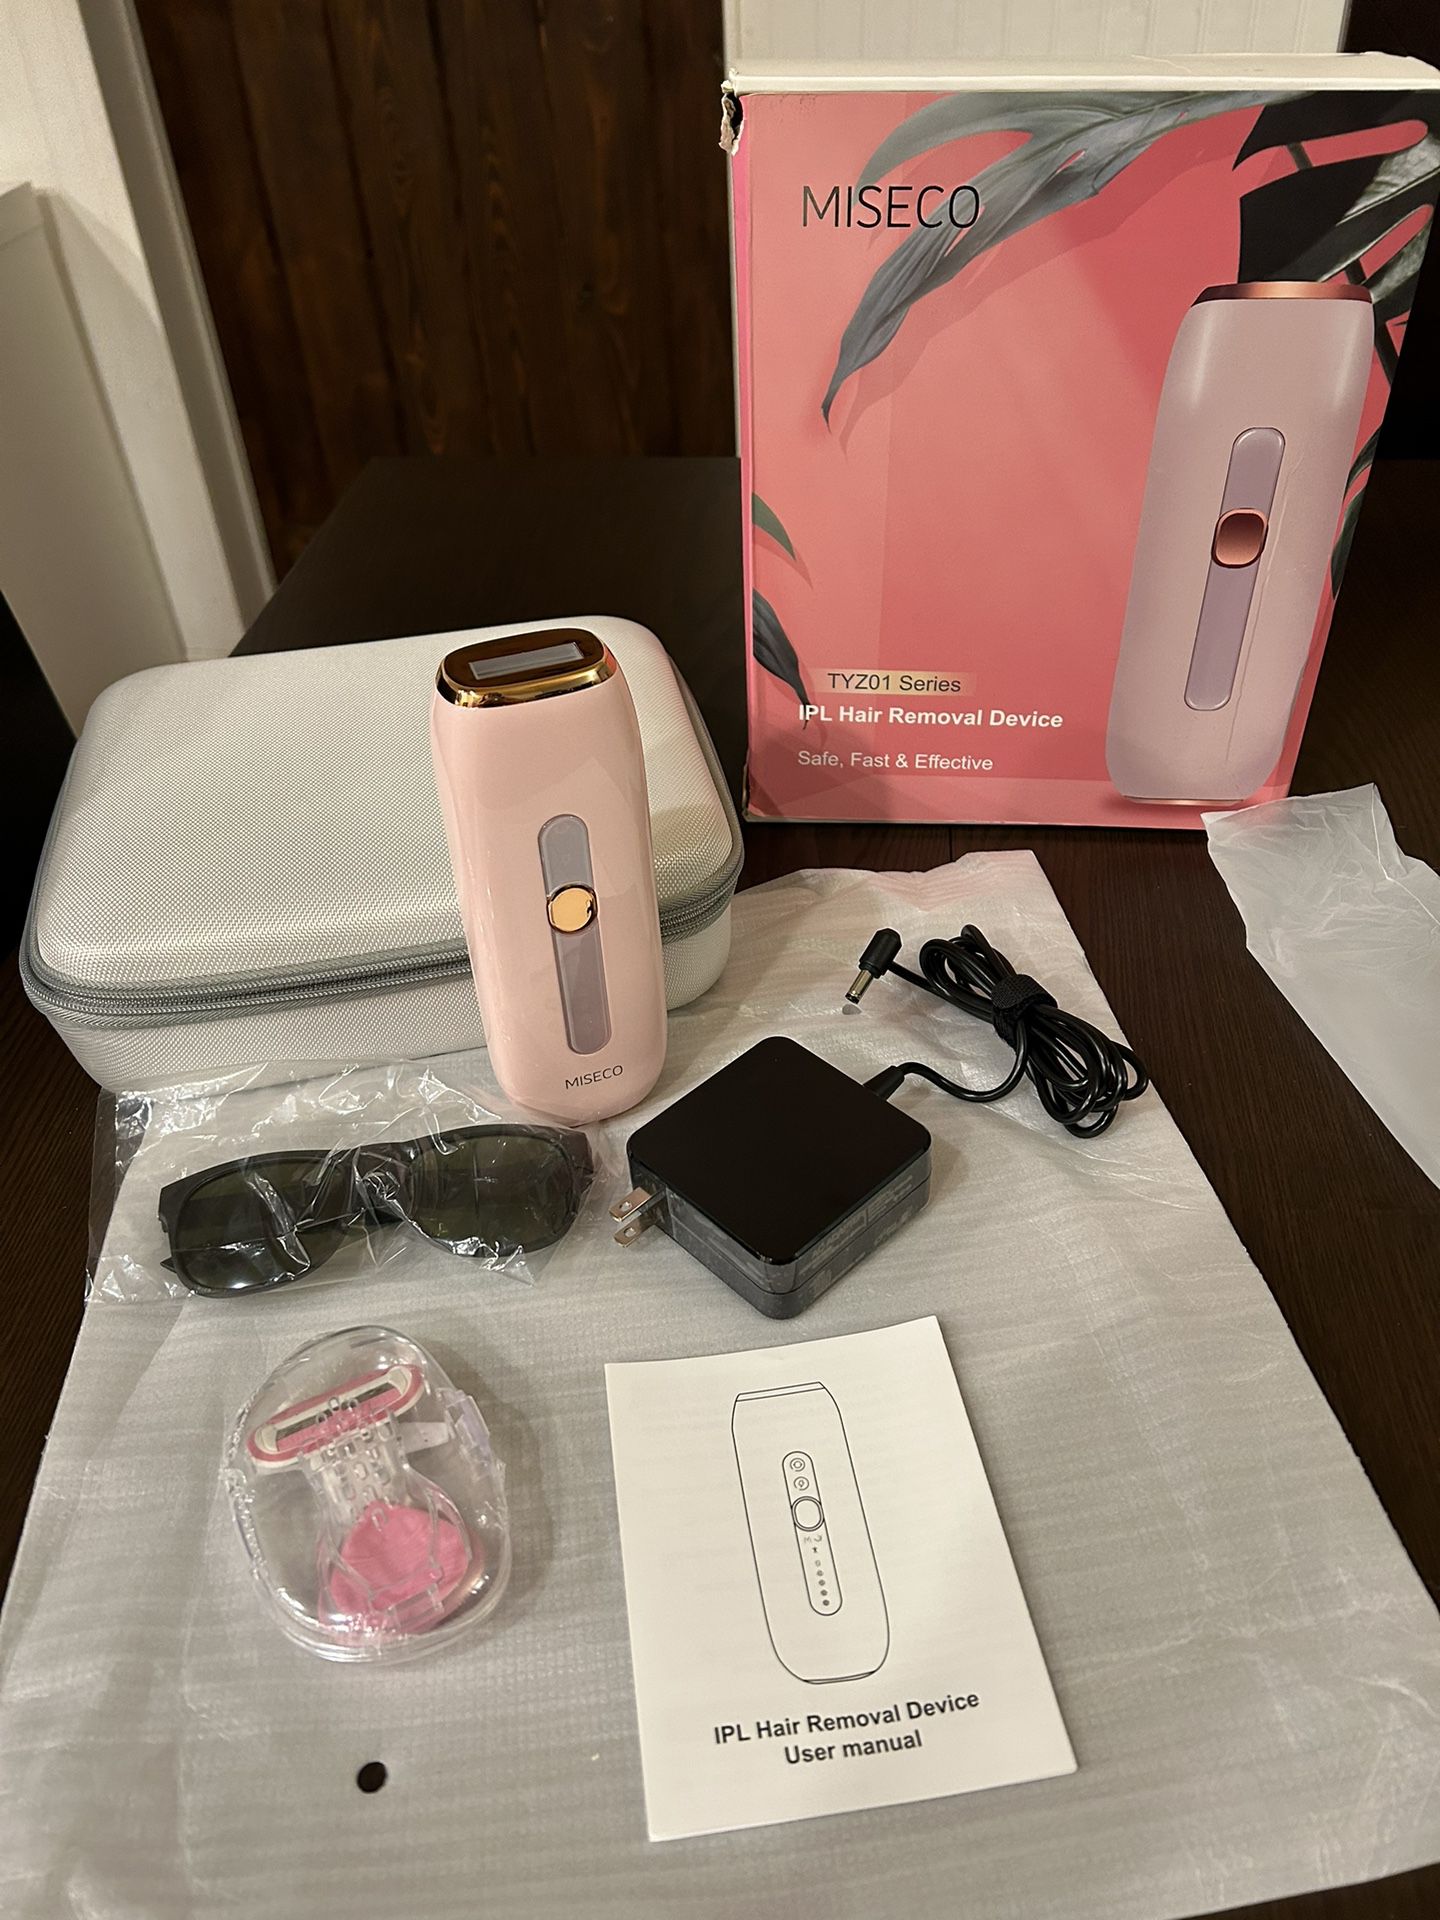  BRAND NEW NEVER USED !!! Painless IPL Hair Removal device with Case, MISECO Permanent Laser Hair Removal Device See Description 